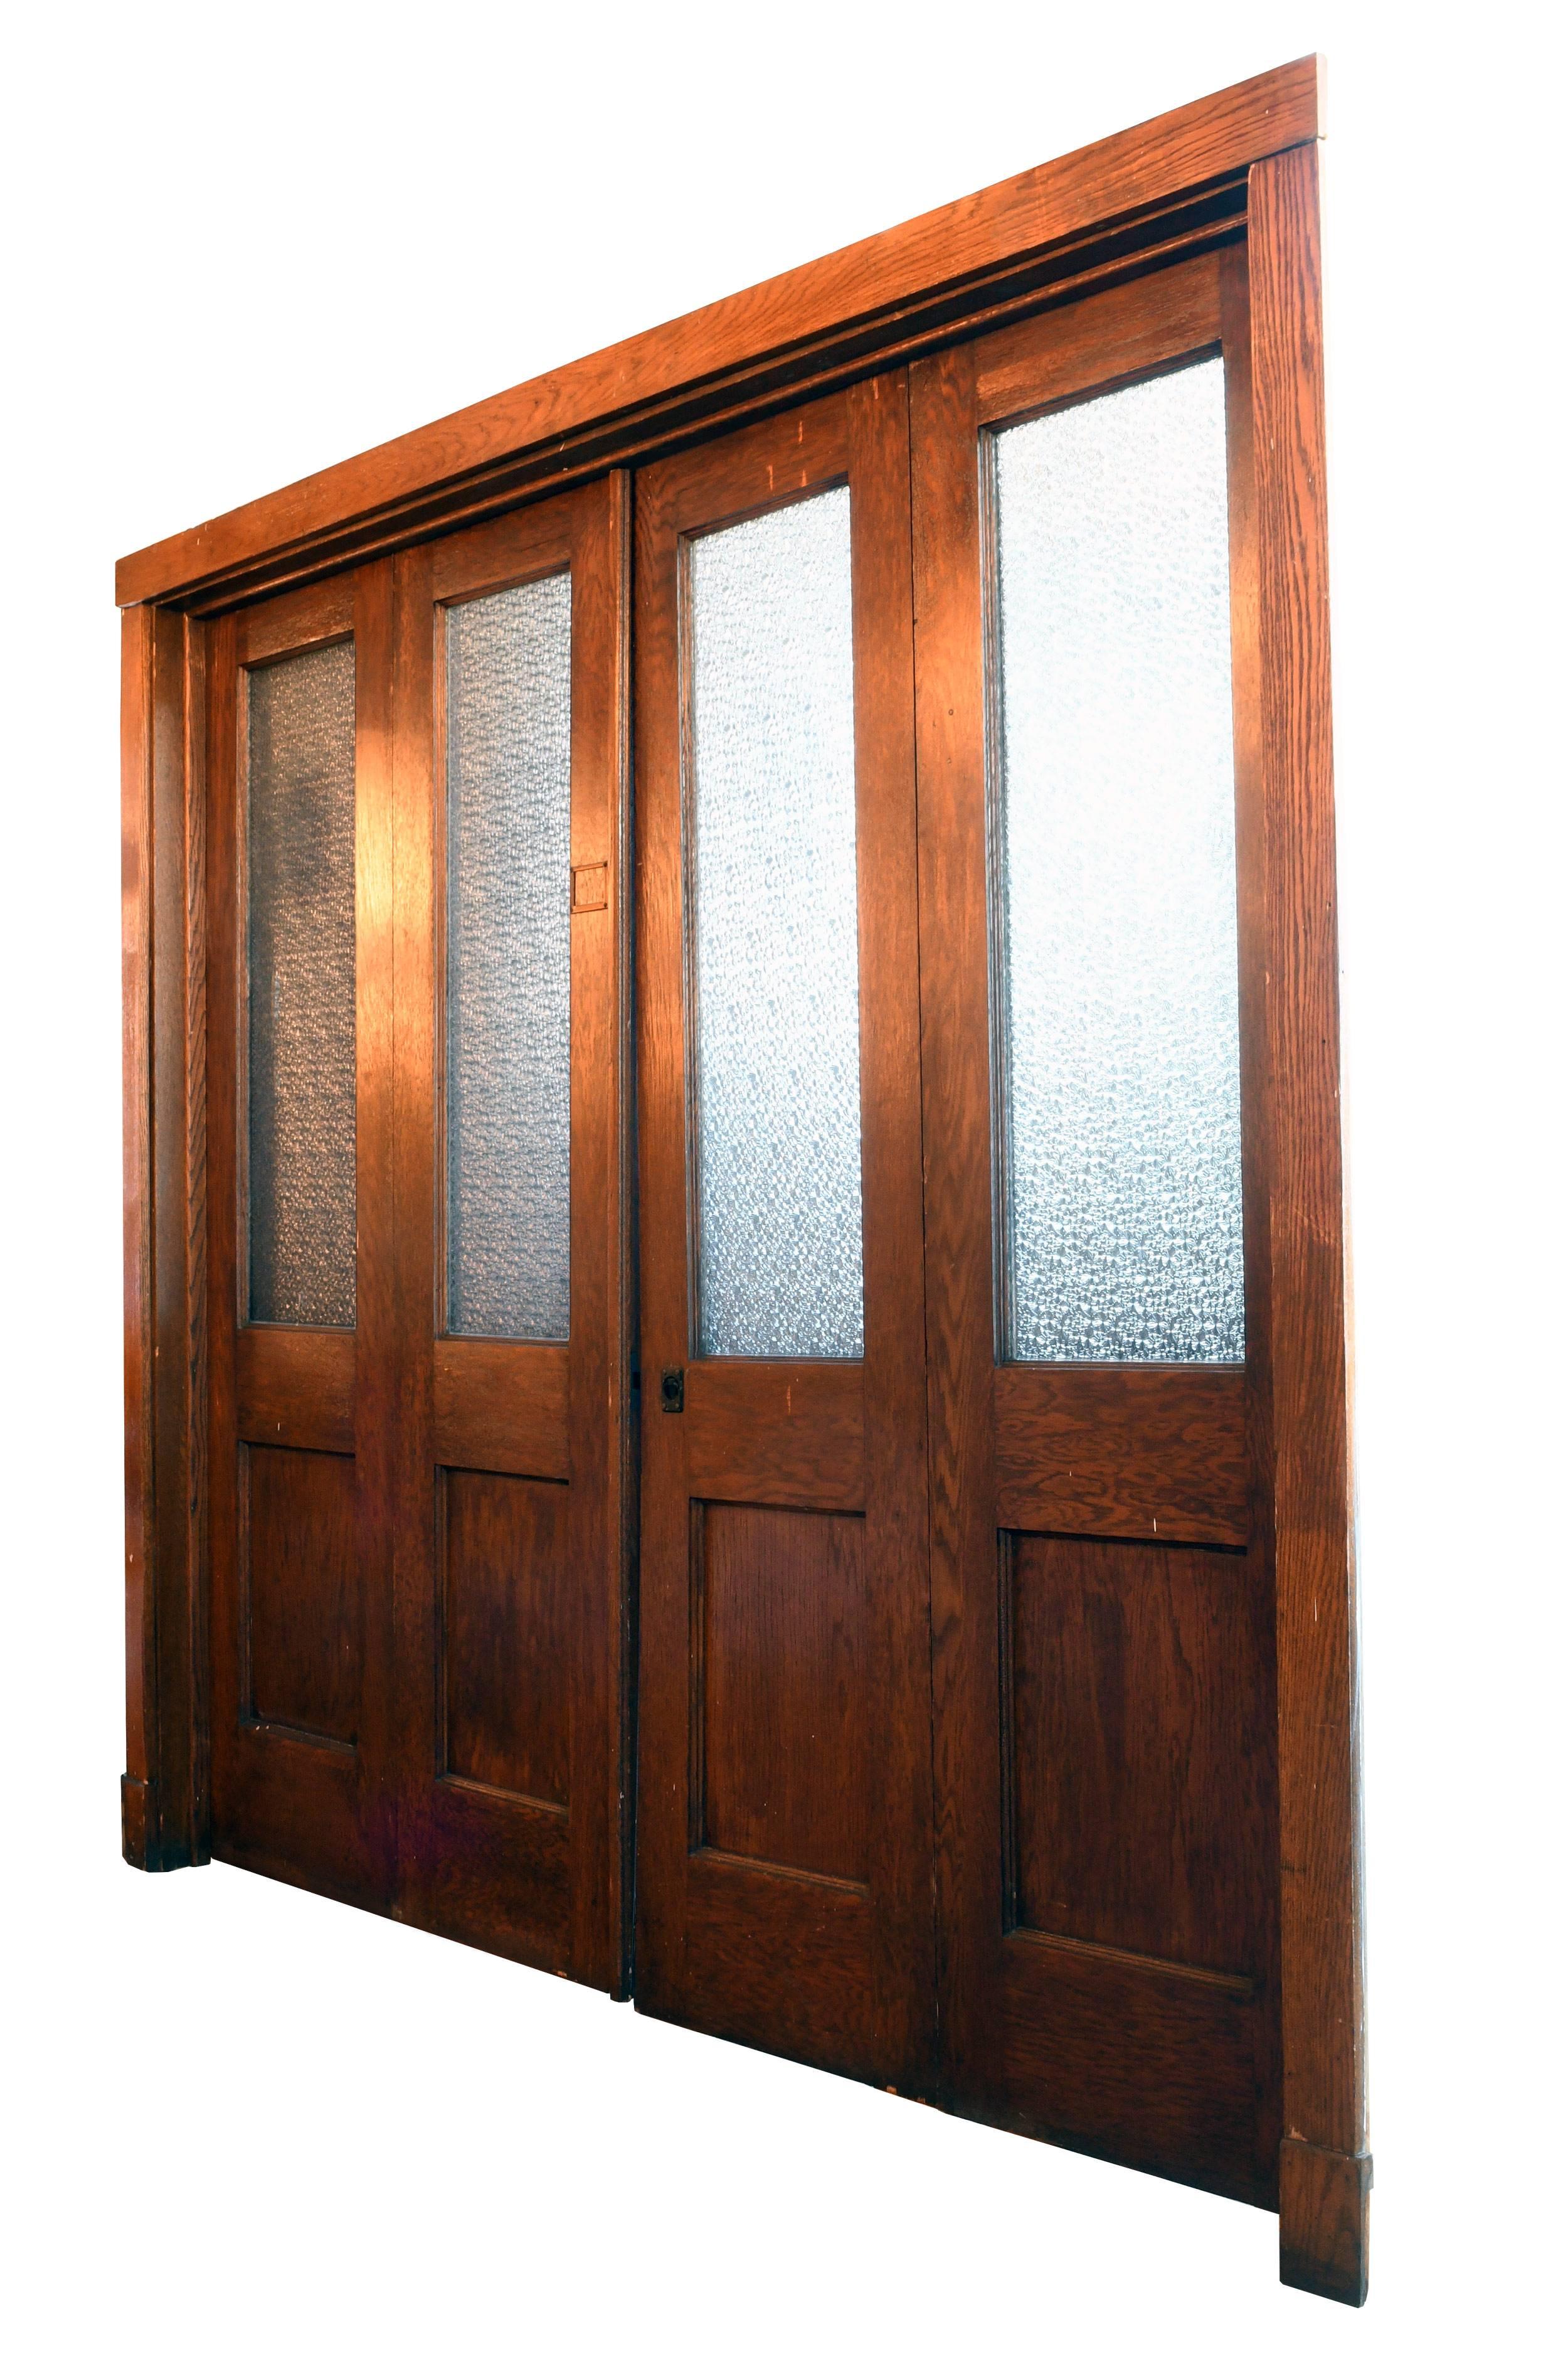 These handsome bi-fold doors originally came from a school in Youngstown, Ohio. Made of oak and stained a rich brown, the wood is in excellent condition. This is noteworthy, considering that the doors spent nearly a century in a school among